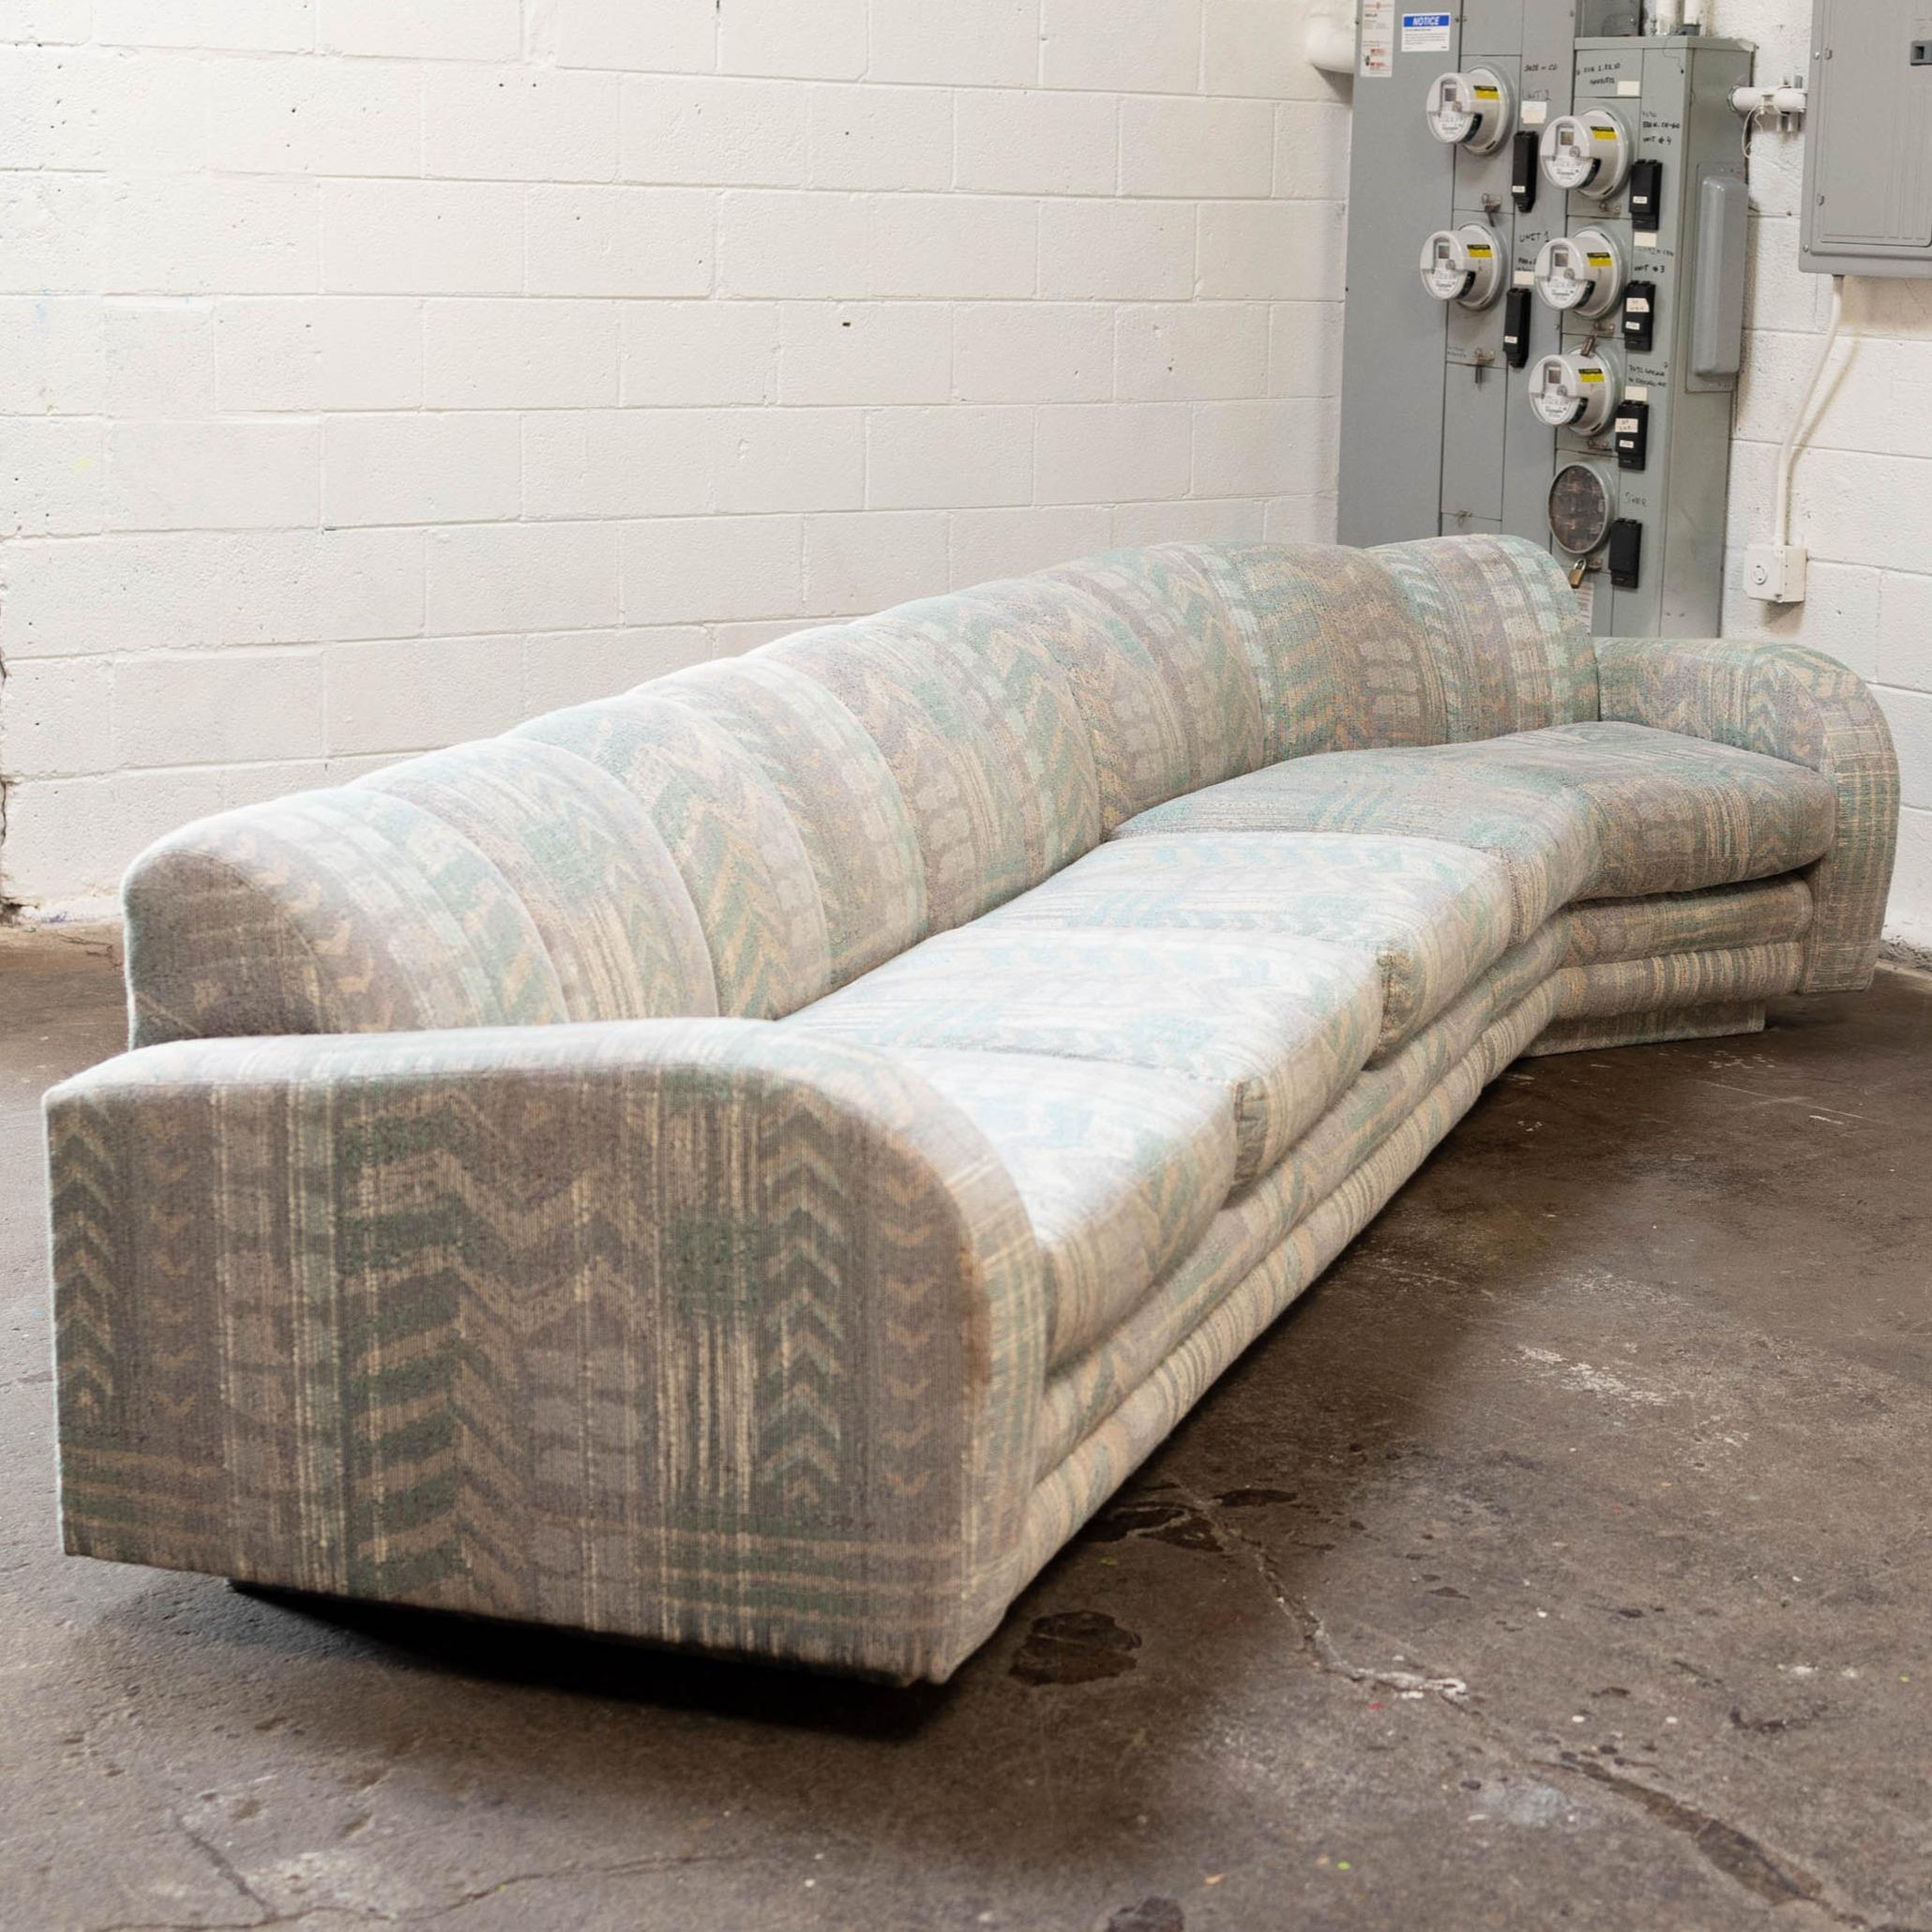 c. 1980s, signed - created by the legendary design company Directional which featured designers like Vladimir Kagan and was founded by Paul McCobb. Fantastic design, expert quality, and unparalleled comfort - this piece is priced with reupholstery